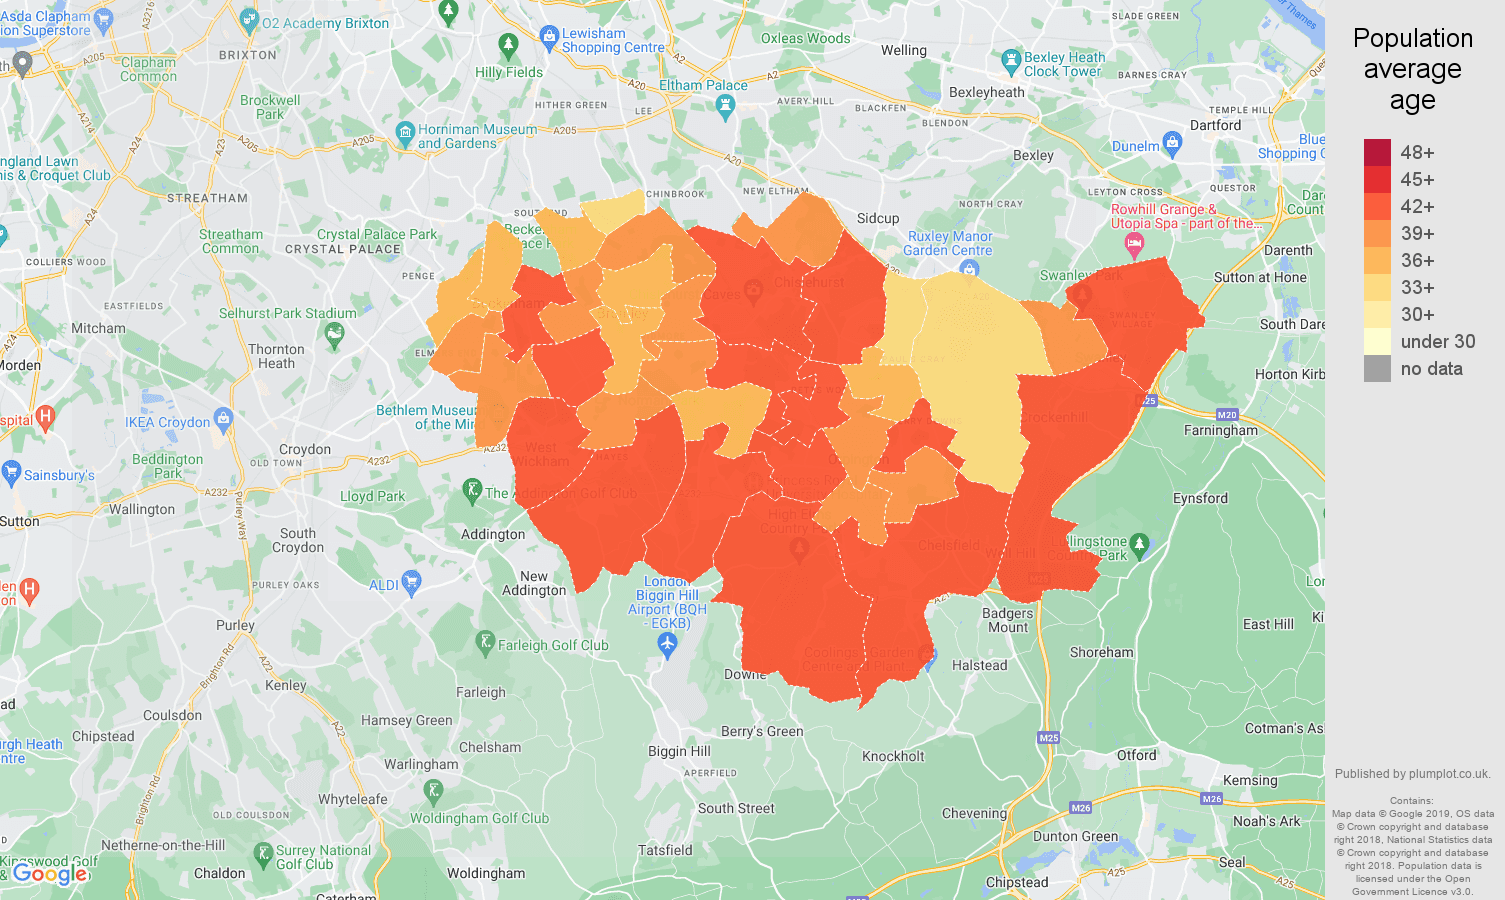 Bromley population average age map